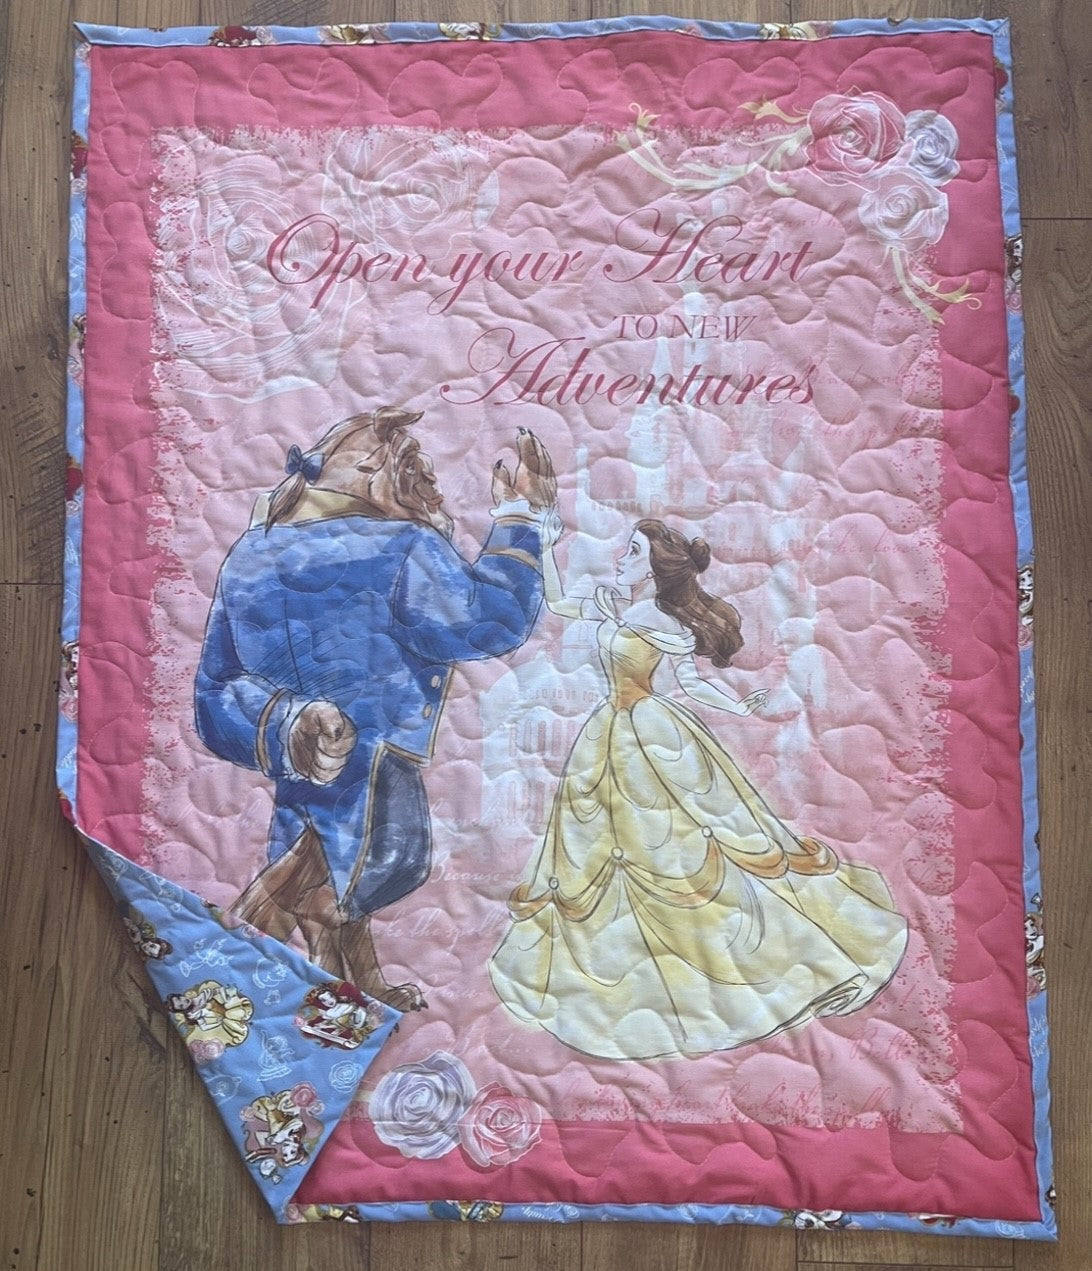 BEAUTY AND THE BEAST Inspired OPEN YOUR HEART TO NEW ADVENTURES Quilted Blanket